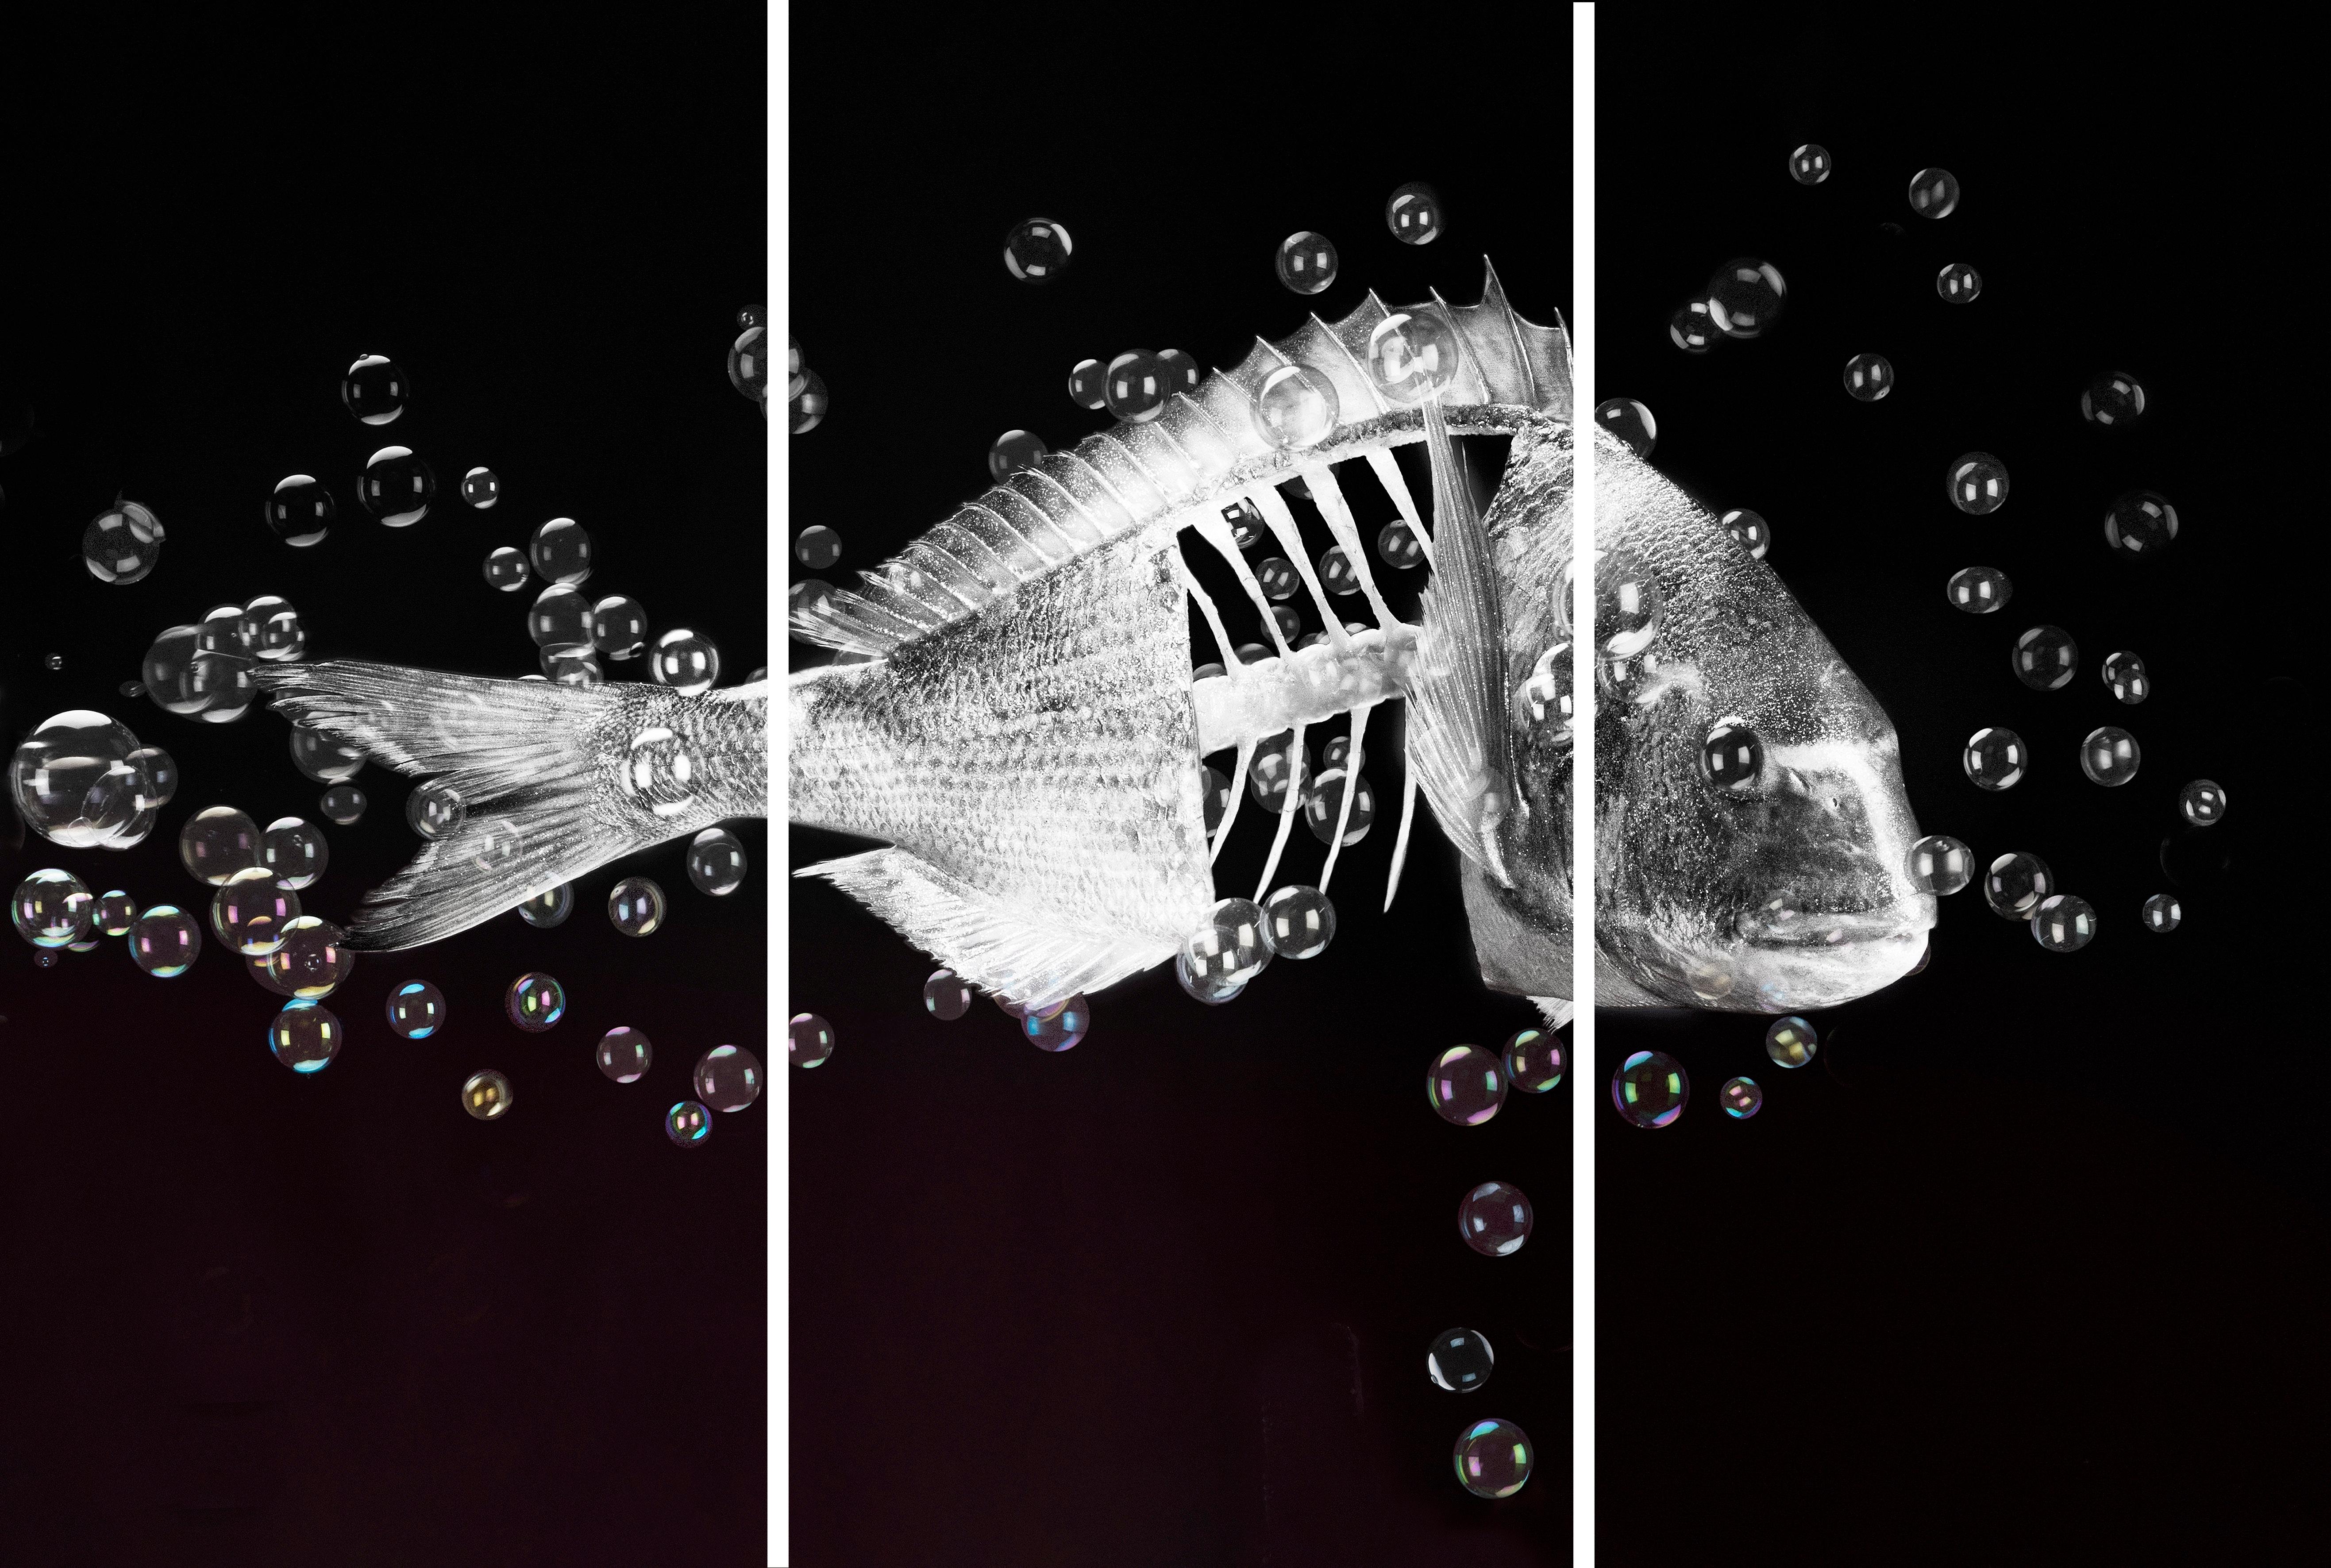 Monica Silva Black and White Photograph - The Fish that new too much  (Triptych)